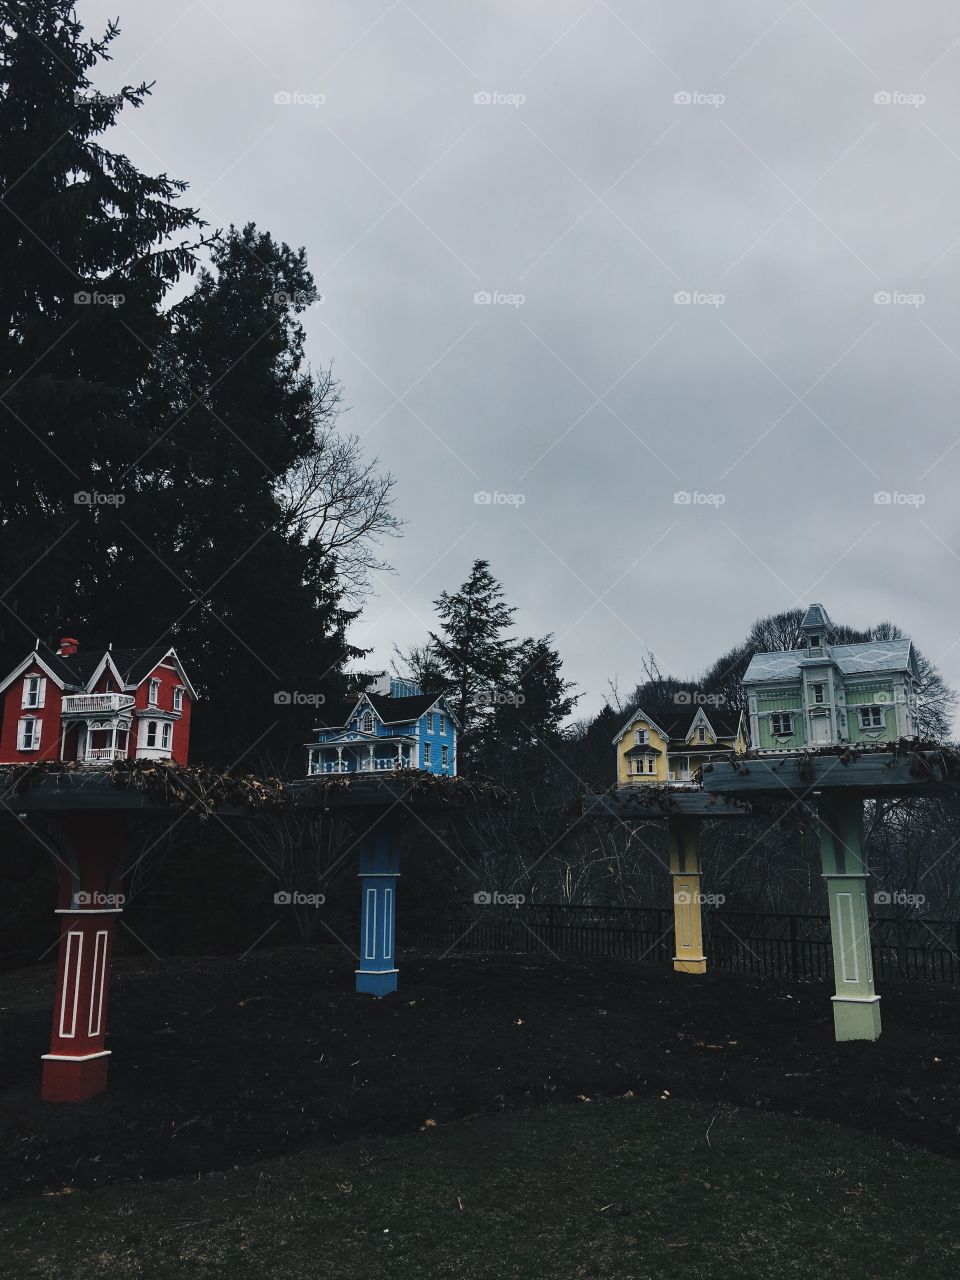 Tiny little houses in a wonderful garden on a gloomy day🌲